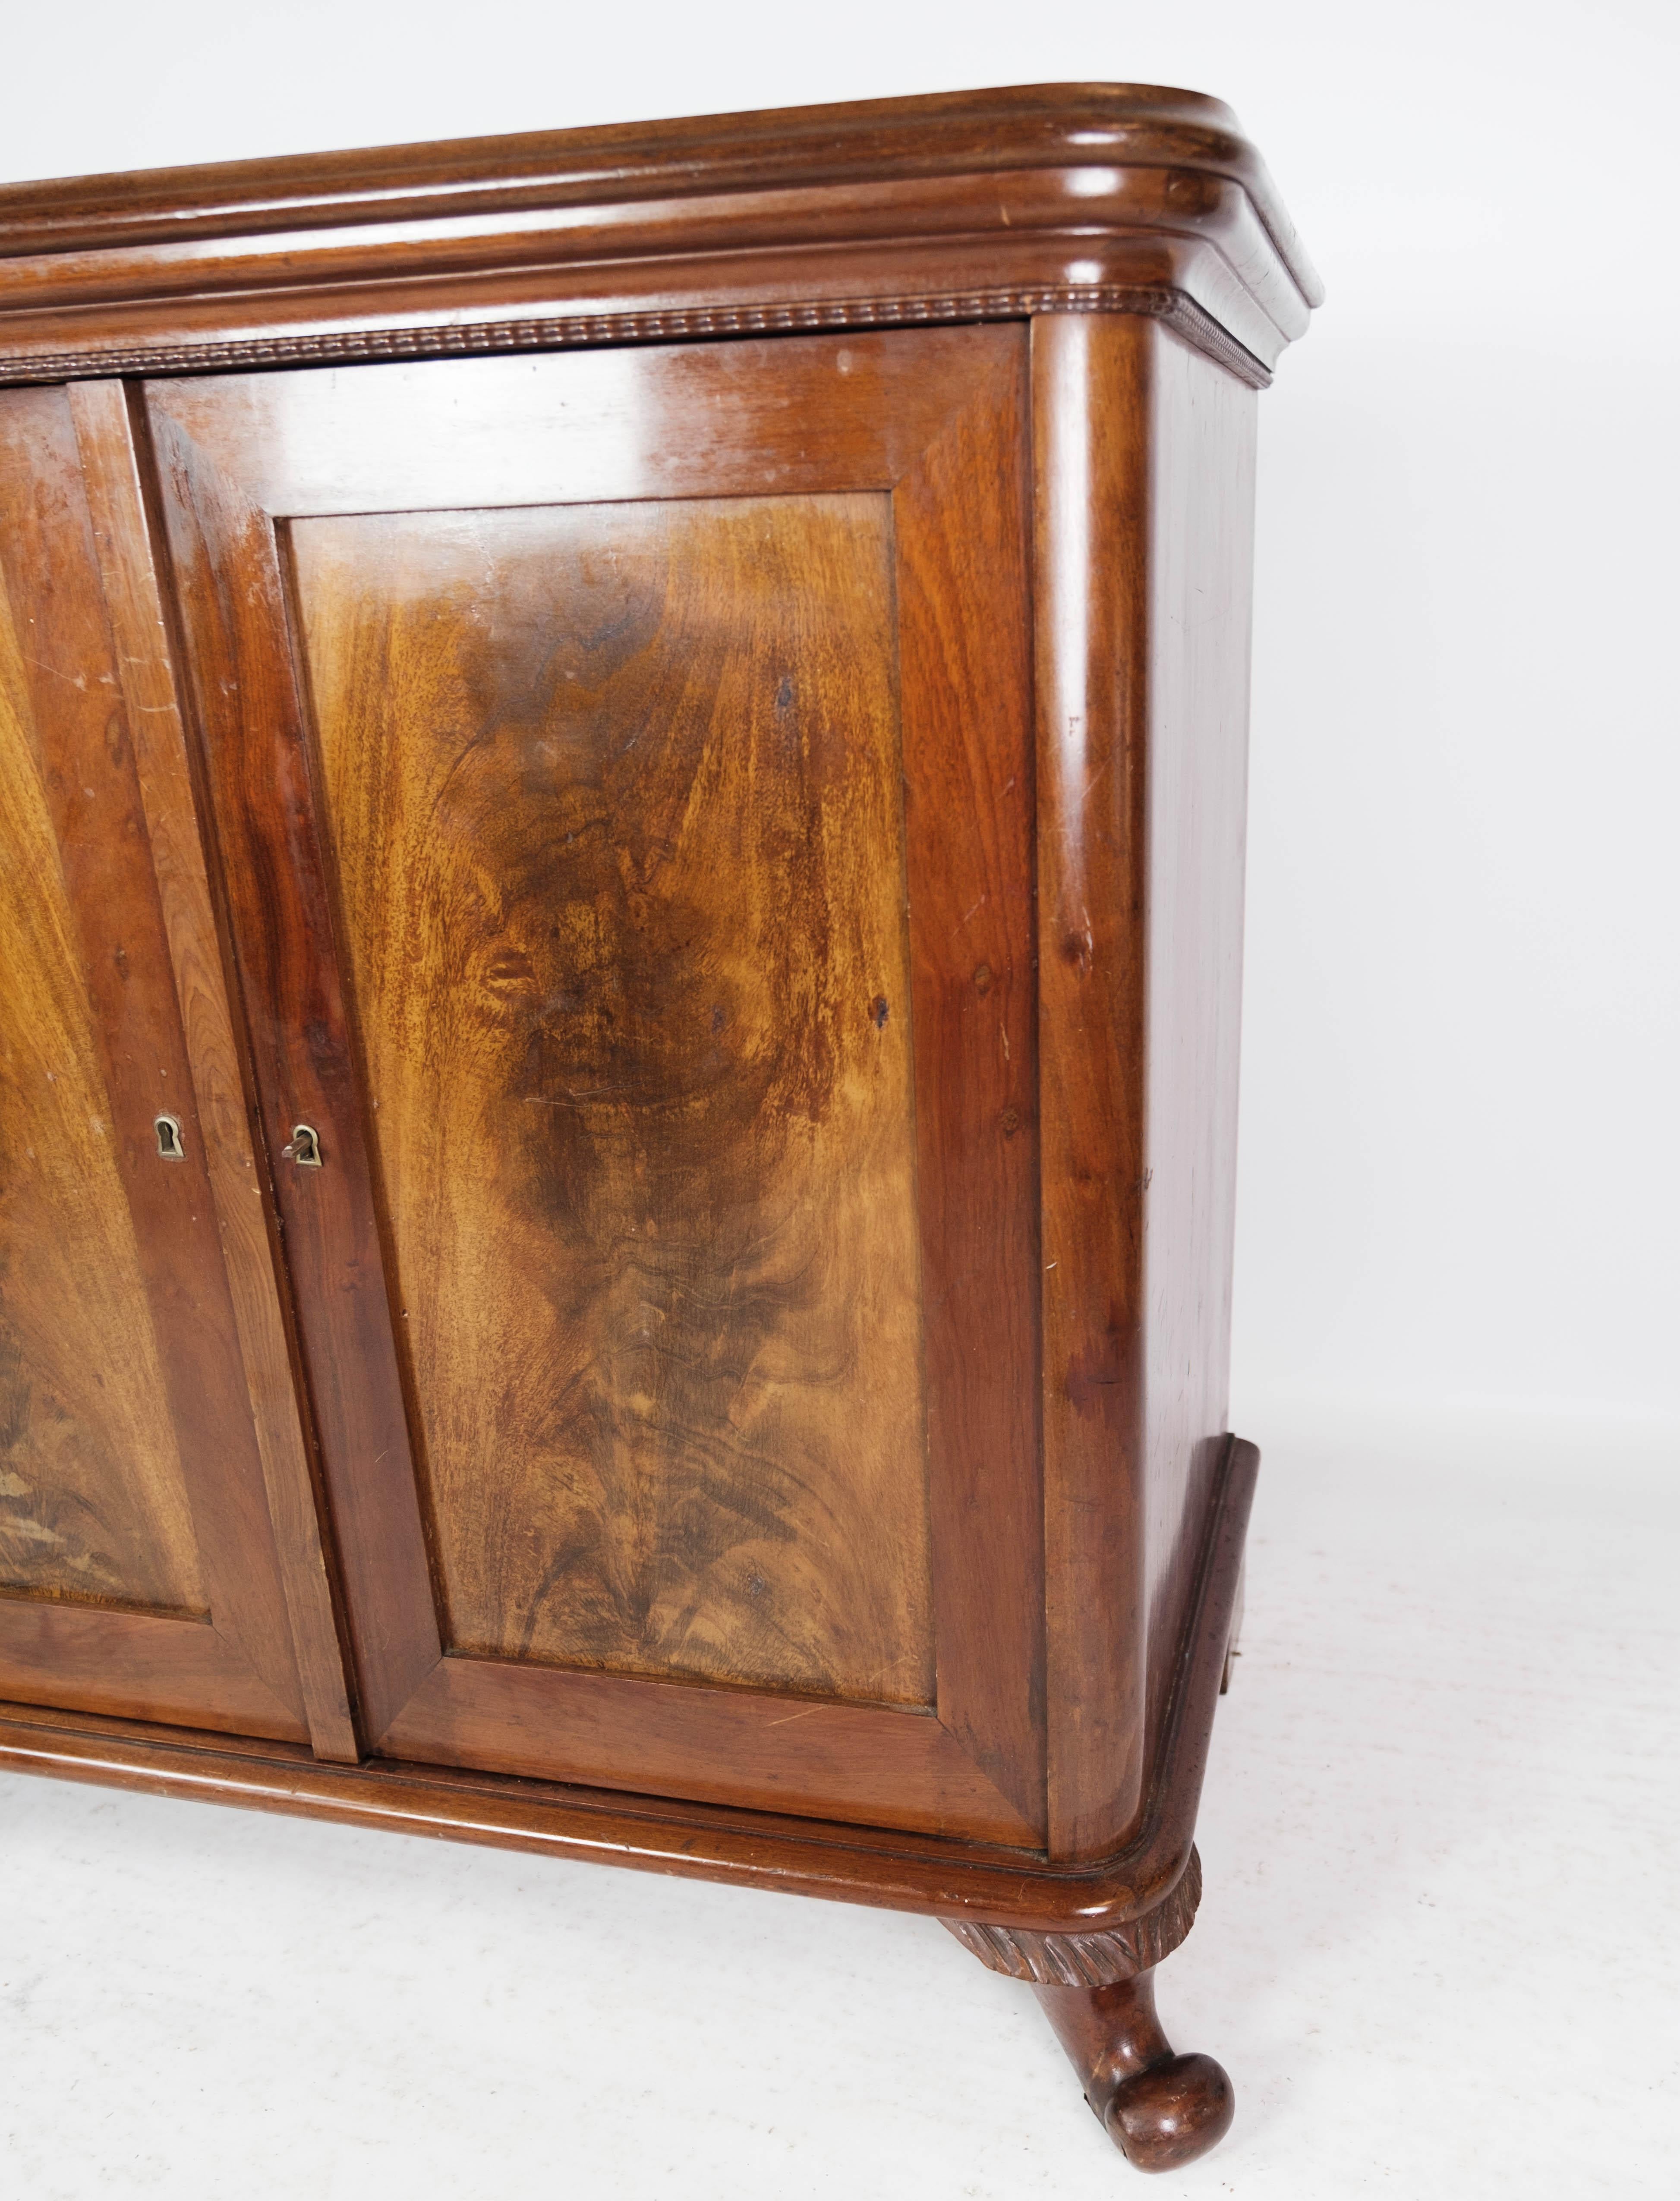 Other Cabinet of Mahogany on Feet, in Great Antique Condition from 1890